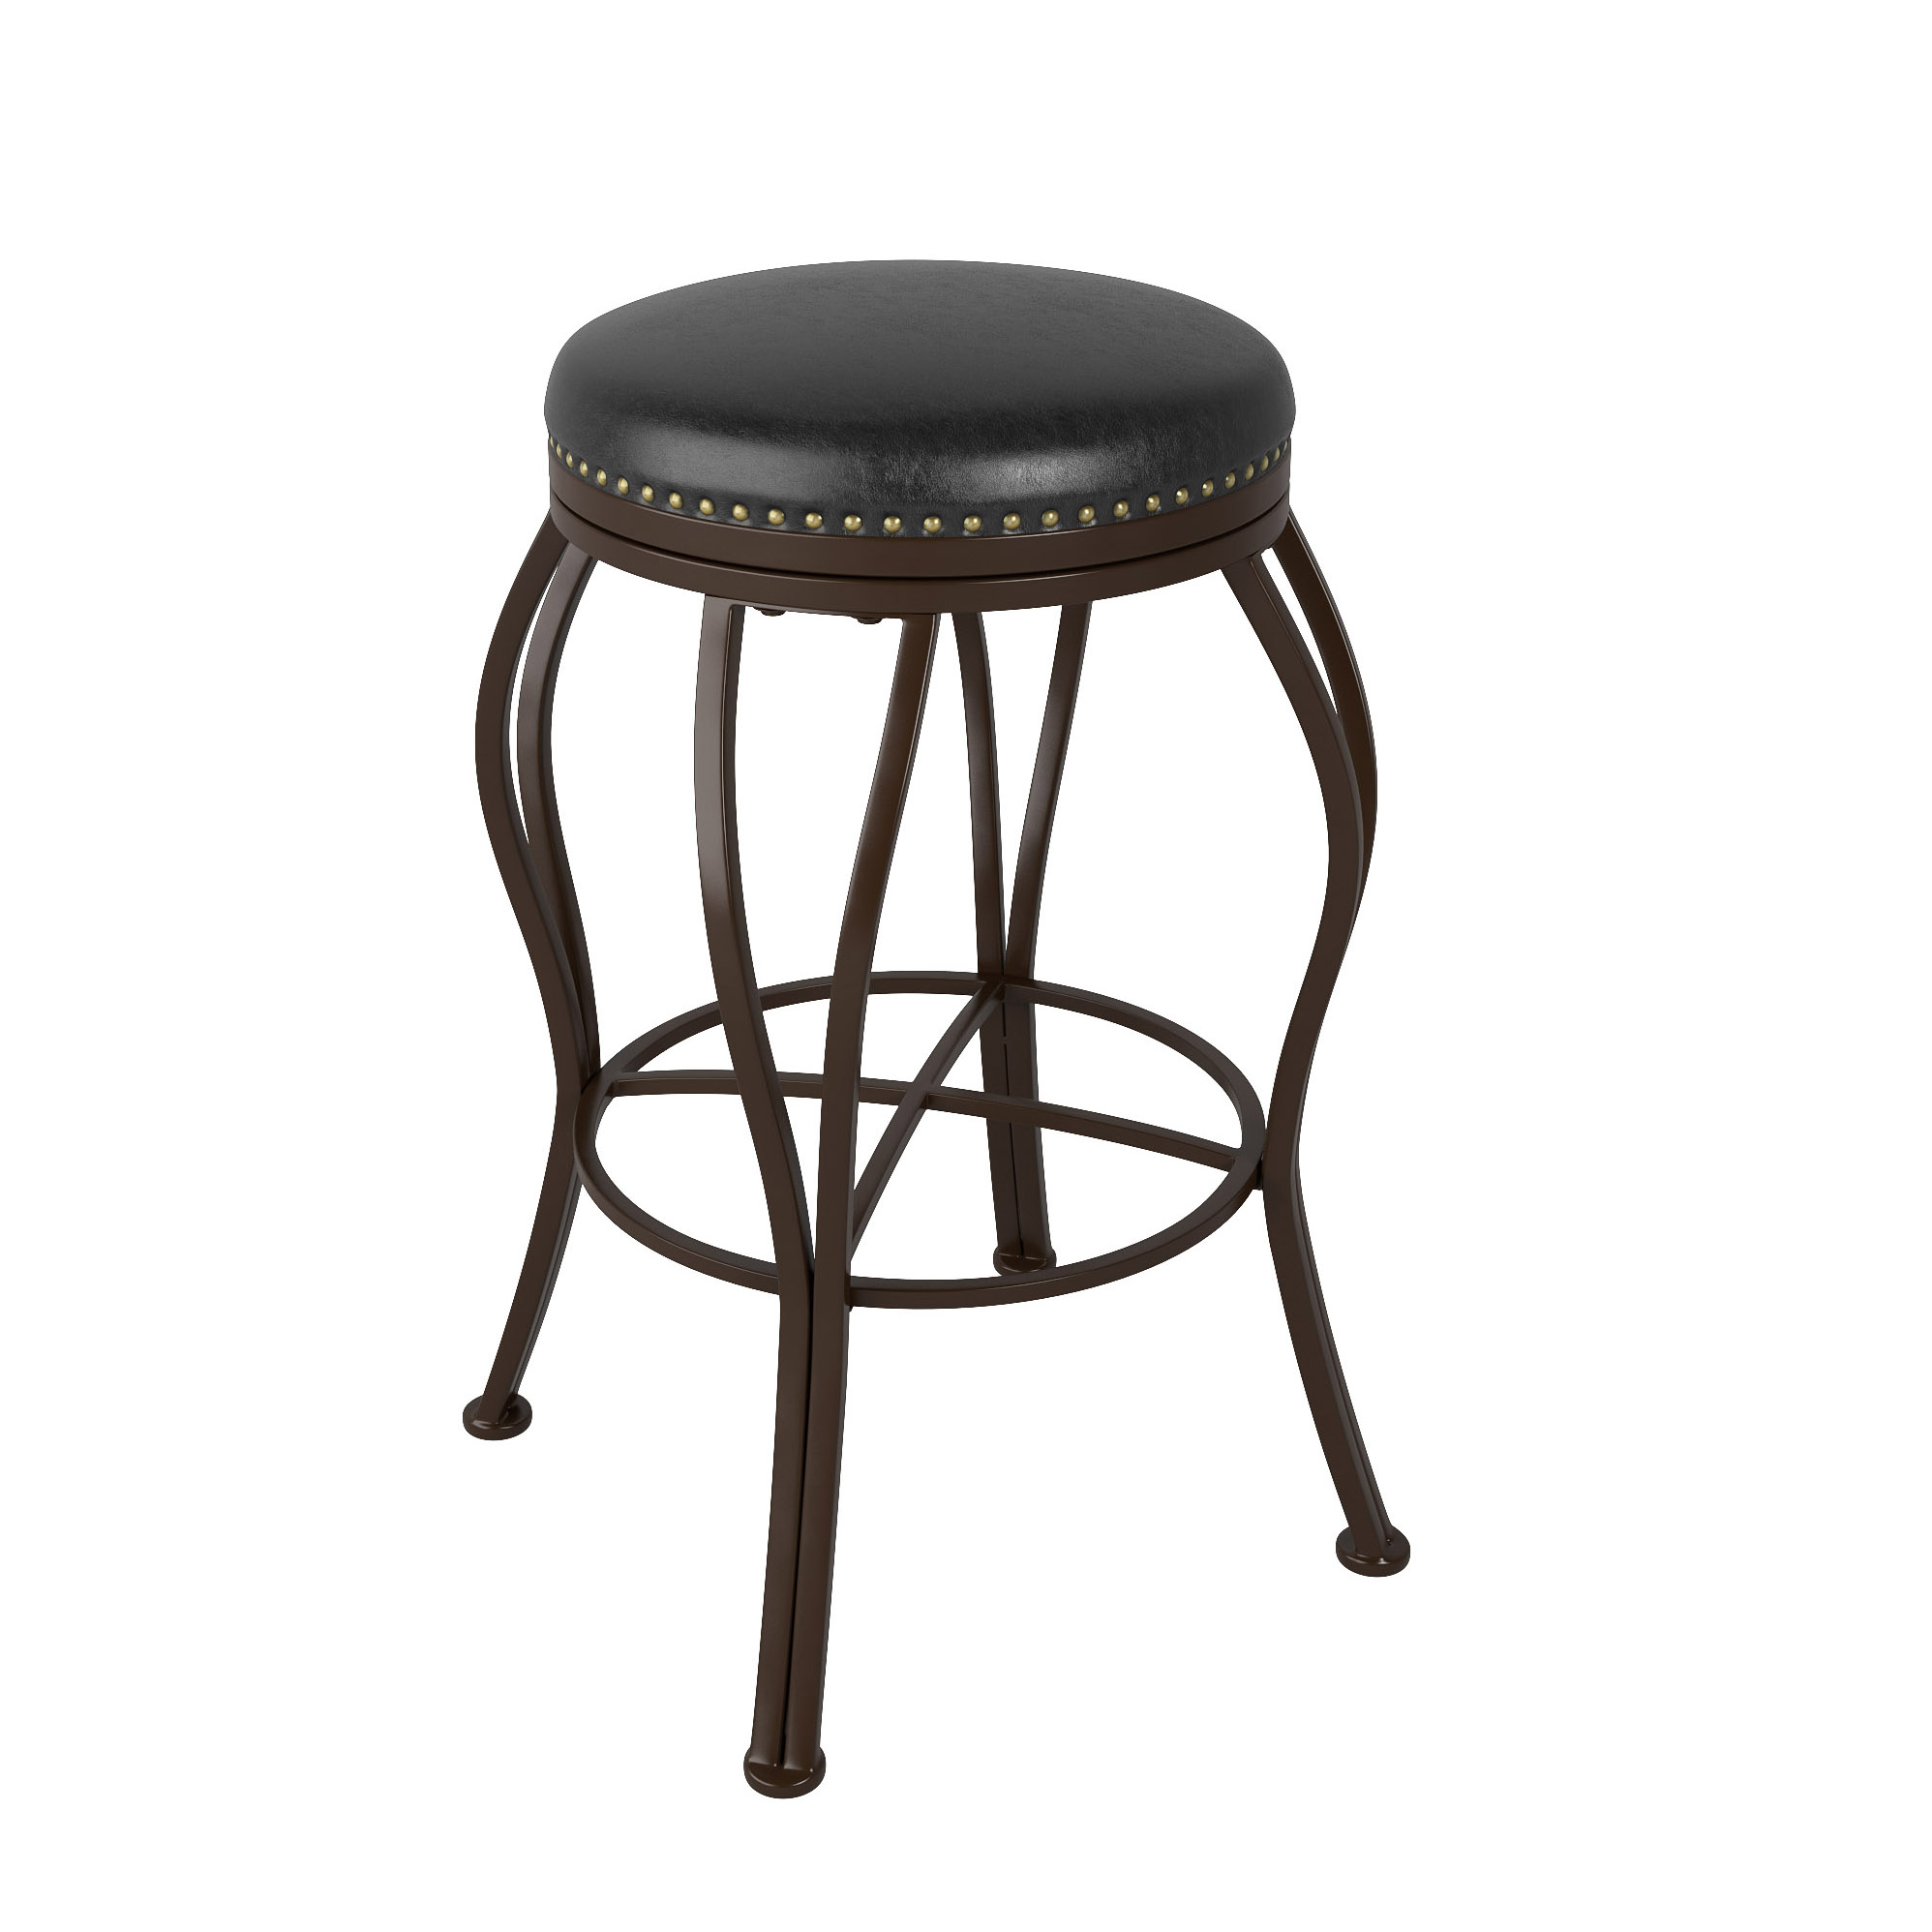 Corliving Jericho Metal Bar Height Barstool With Dark Brown Bonded Leather Seat